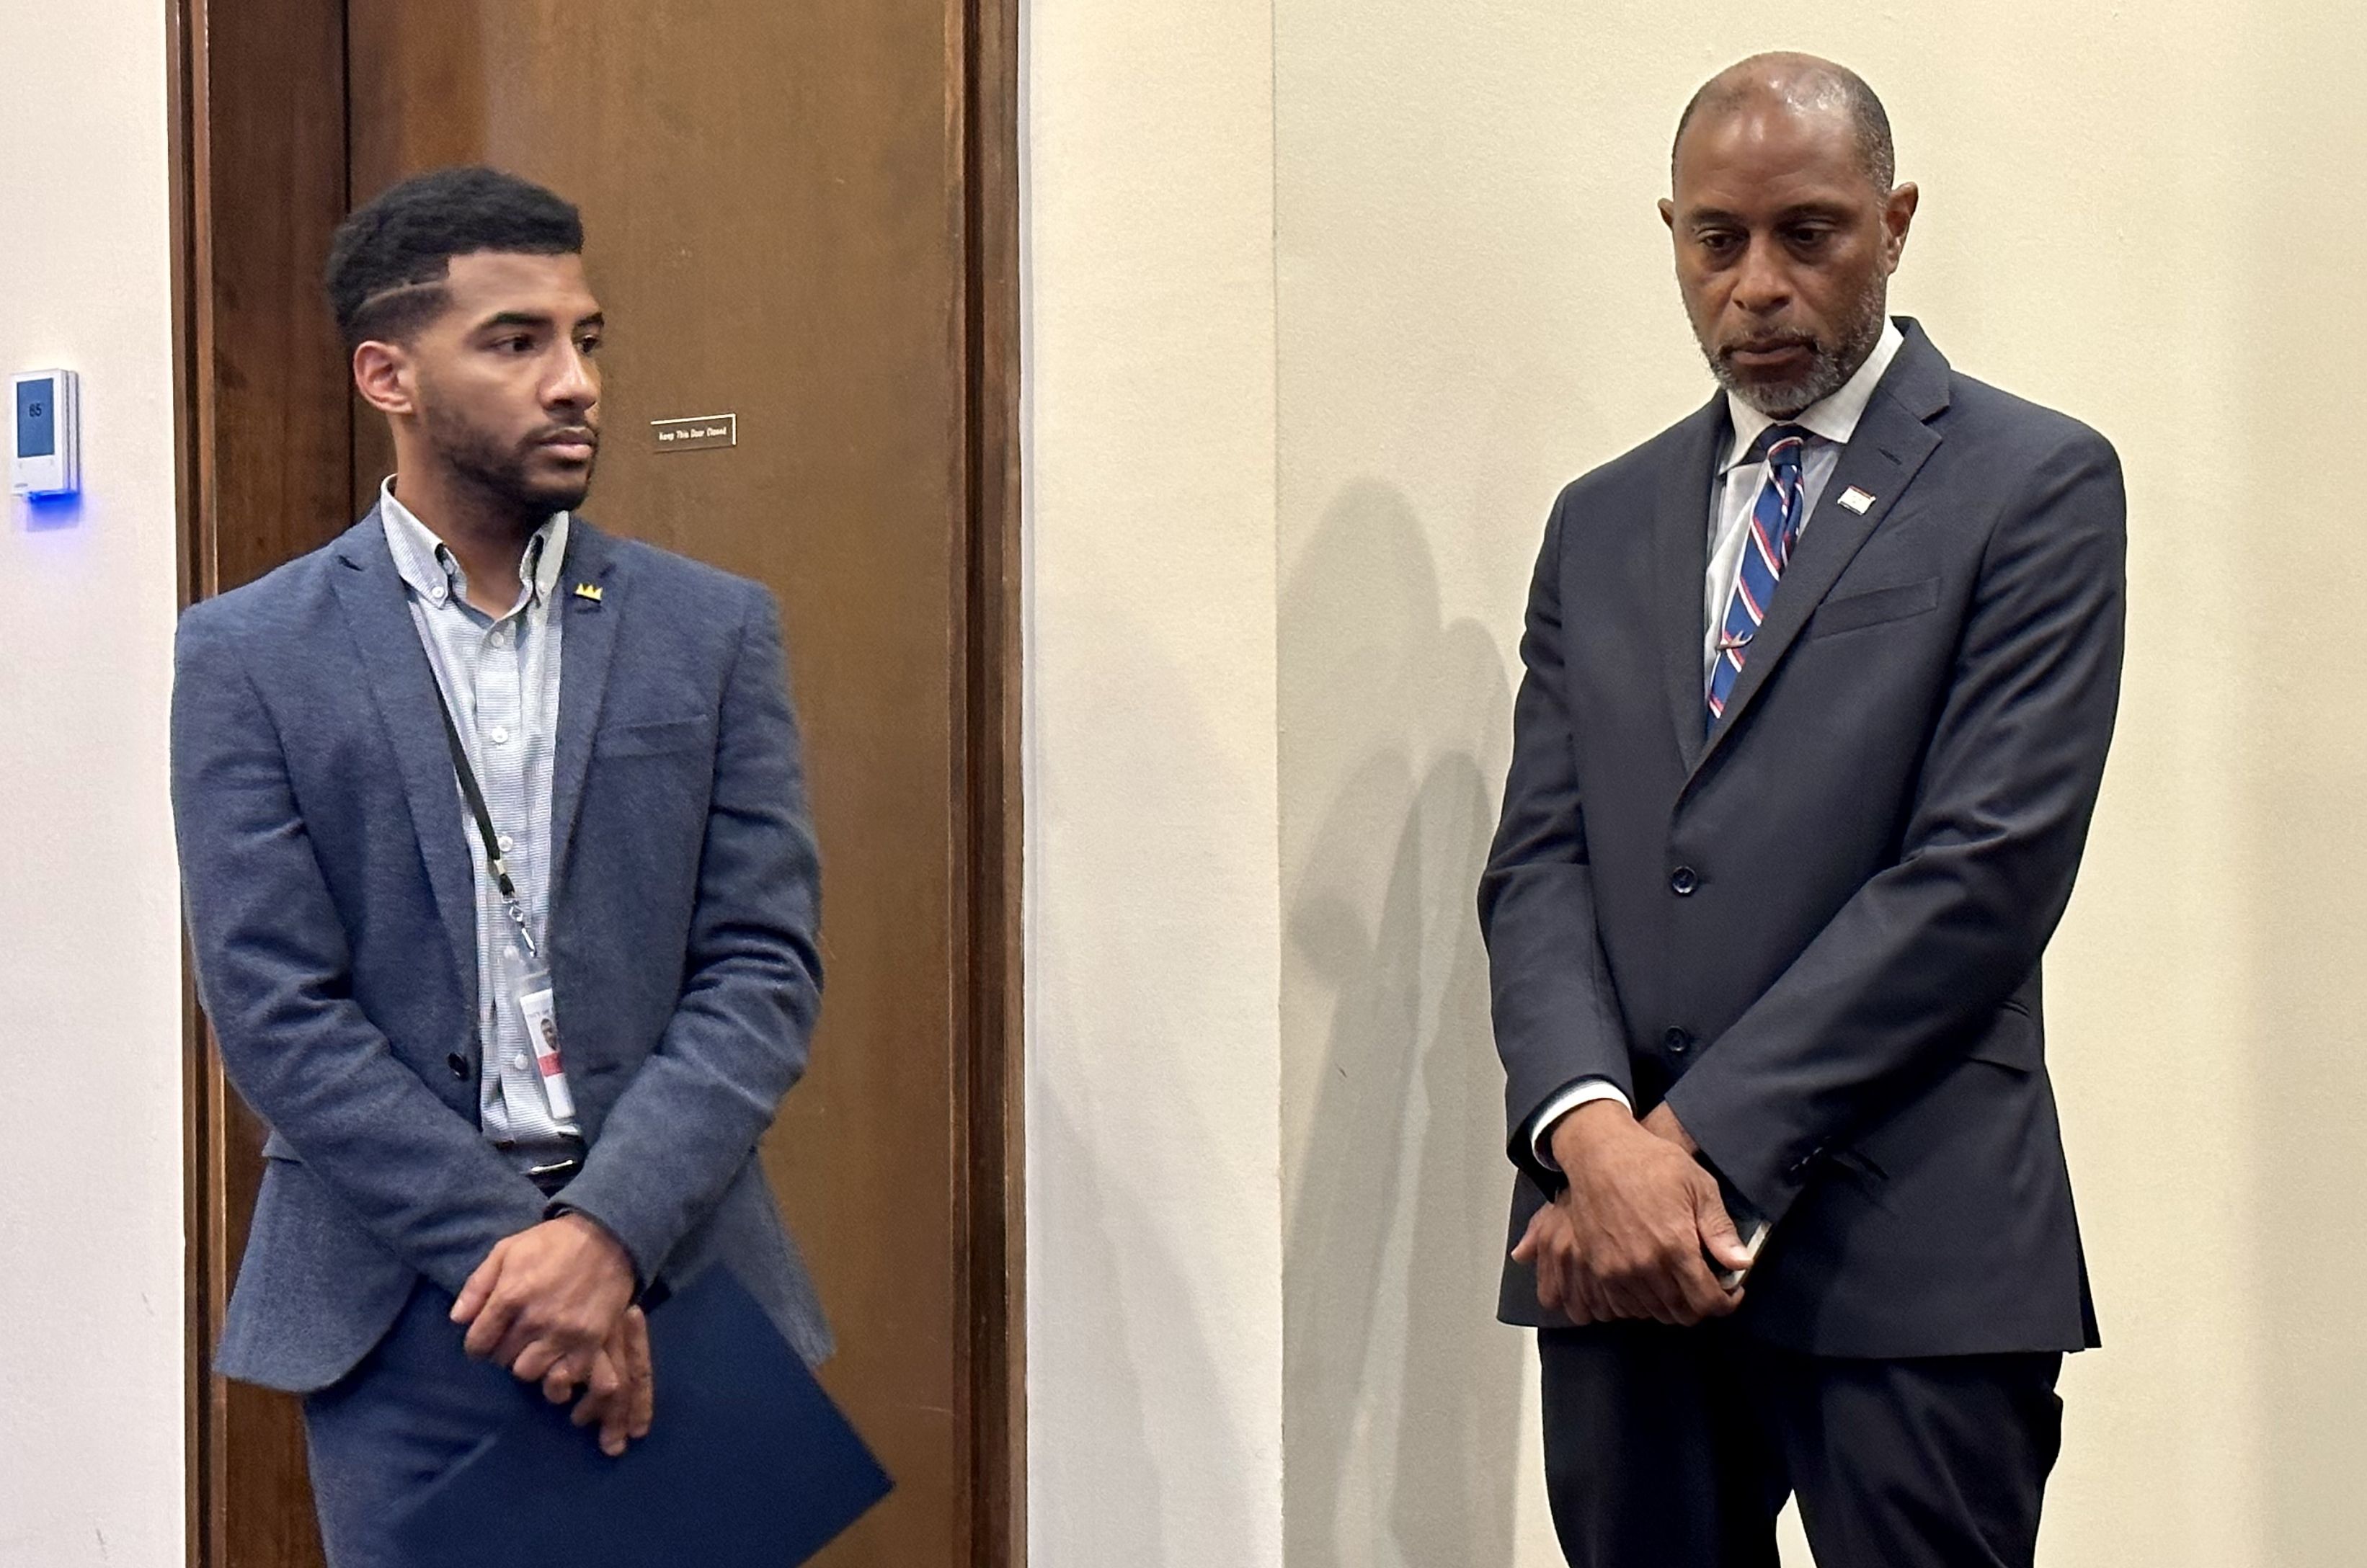 Photo shows Gregory Joseph and Andrew Logan, both members of the mayor's communications team, at a media briefing.